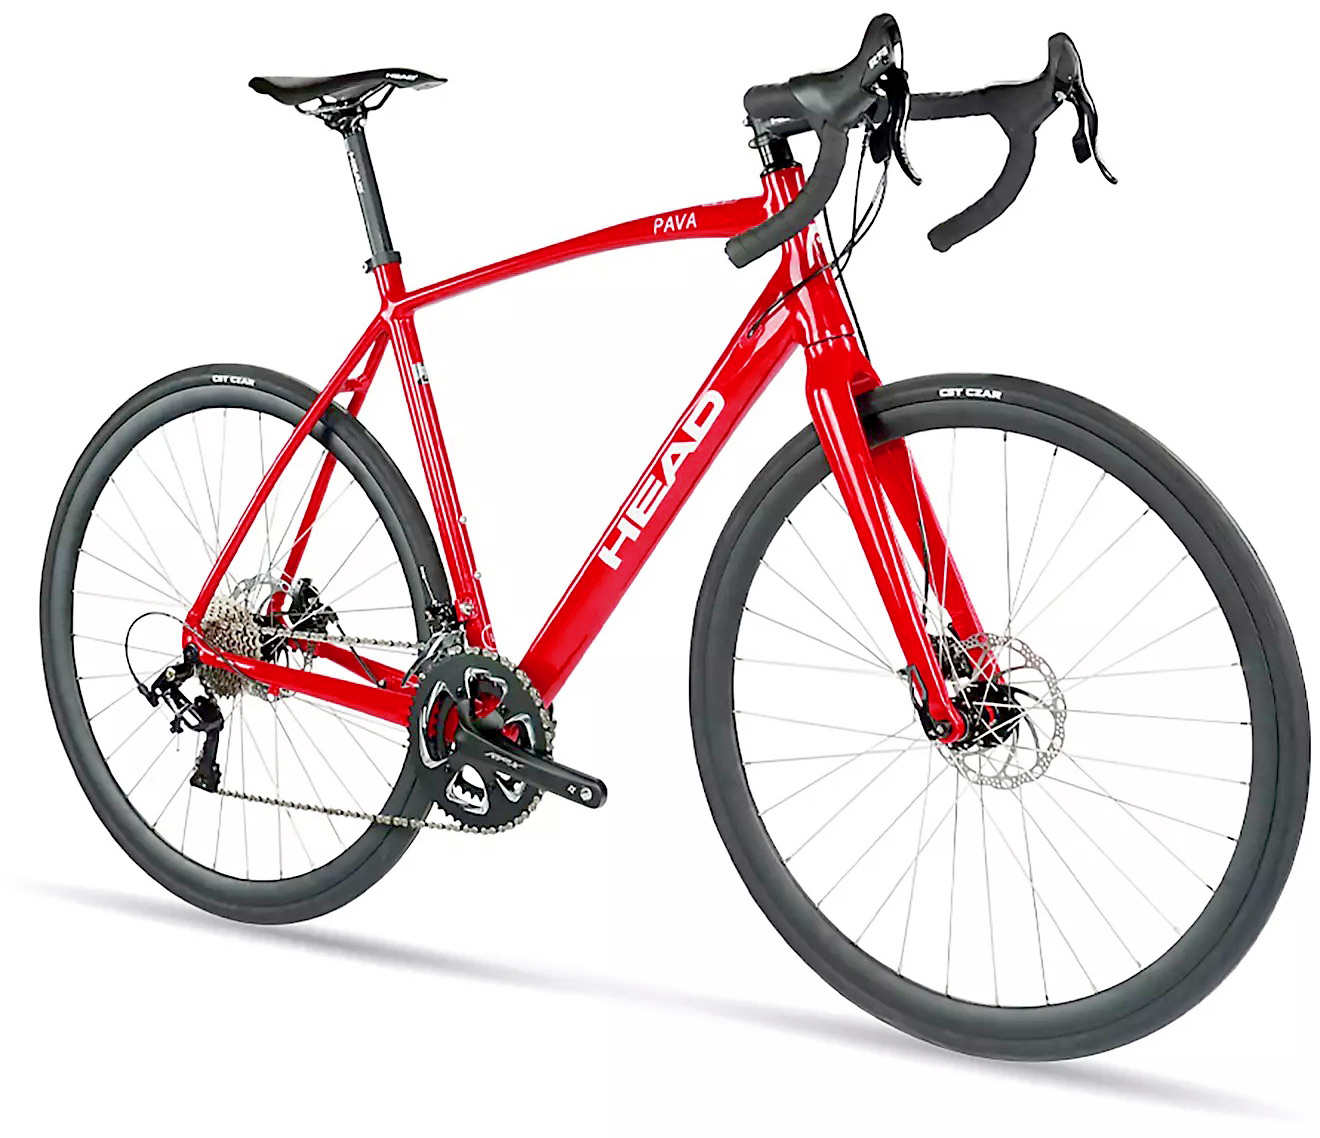 Incredible Road Bike Discounts
HEAD PAVA w/Carbon Fork
Head Site List Price $1499 
Near Wholesale Deal $574

Top Rated, 22 Speed Endurance Road Bikes